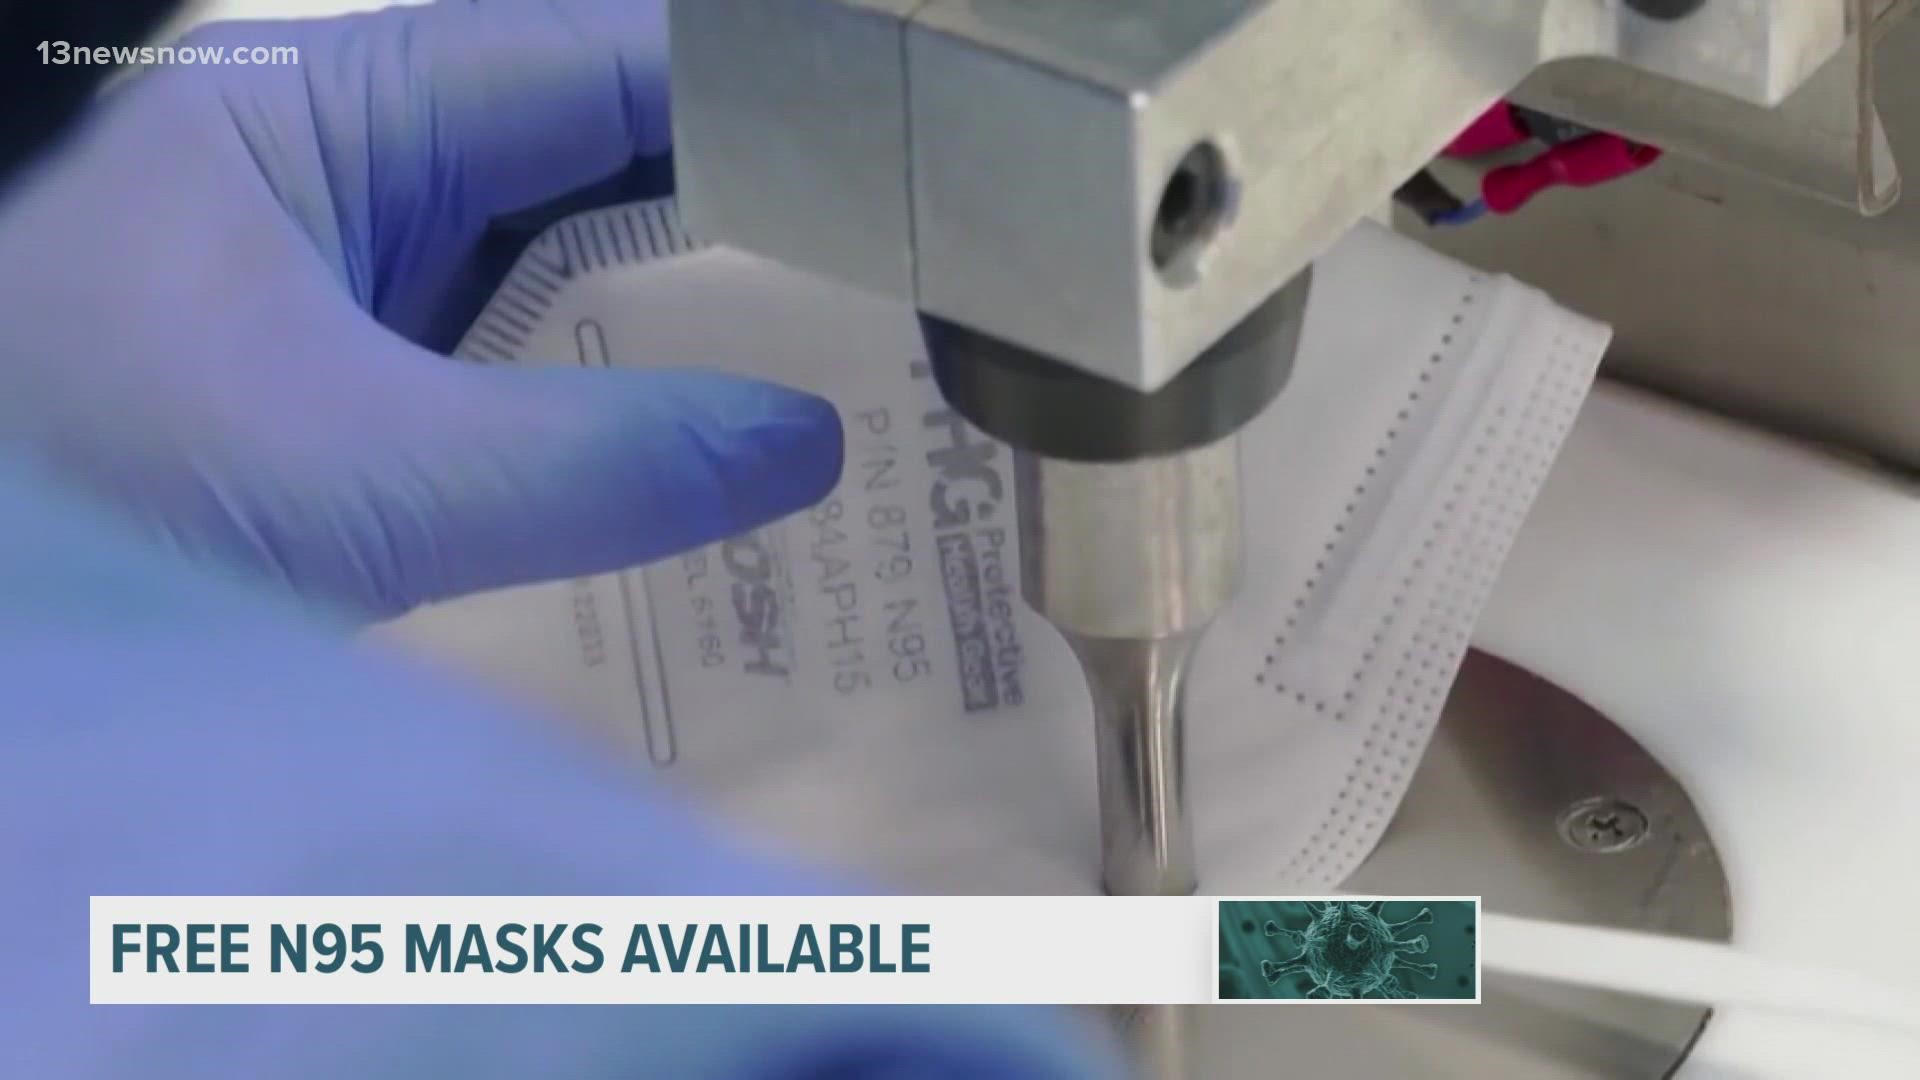 In the pandemic, the CDC has emphasized the importance of wearing masks. Recently, officials said N95 and KN95 masks are the best options.